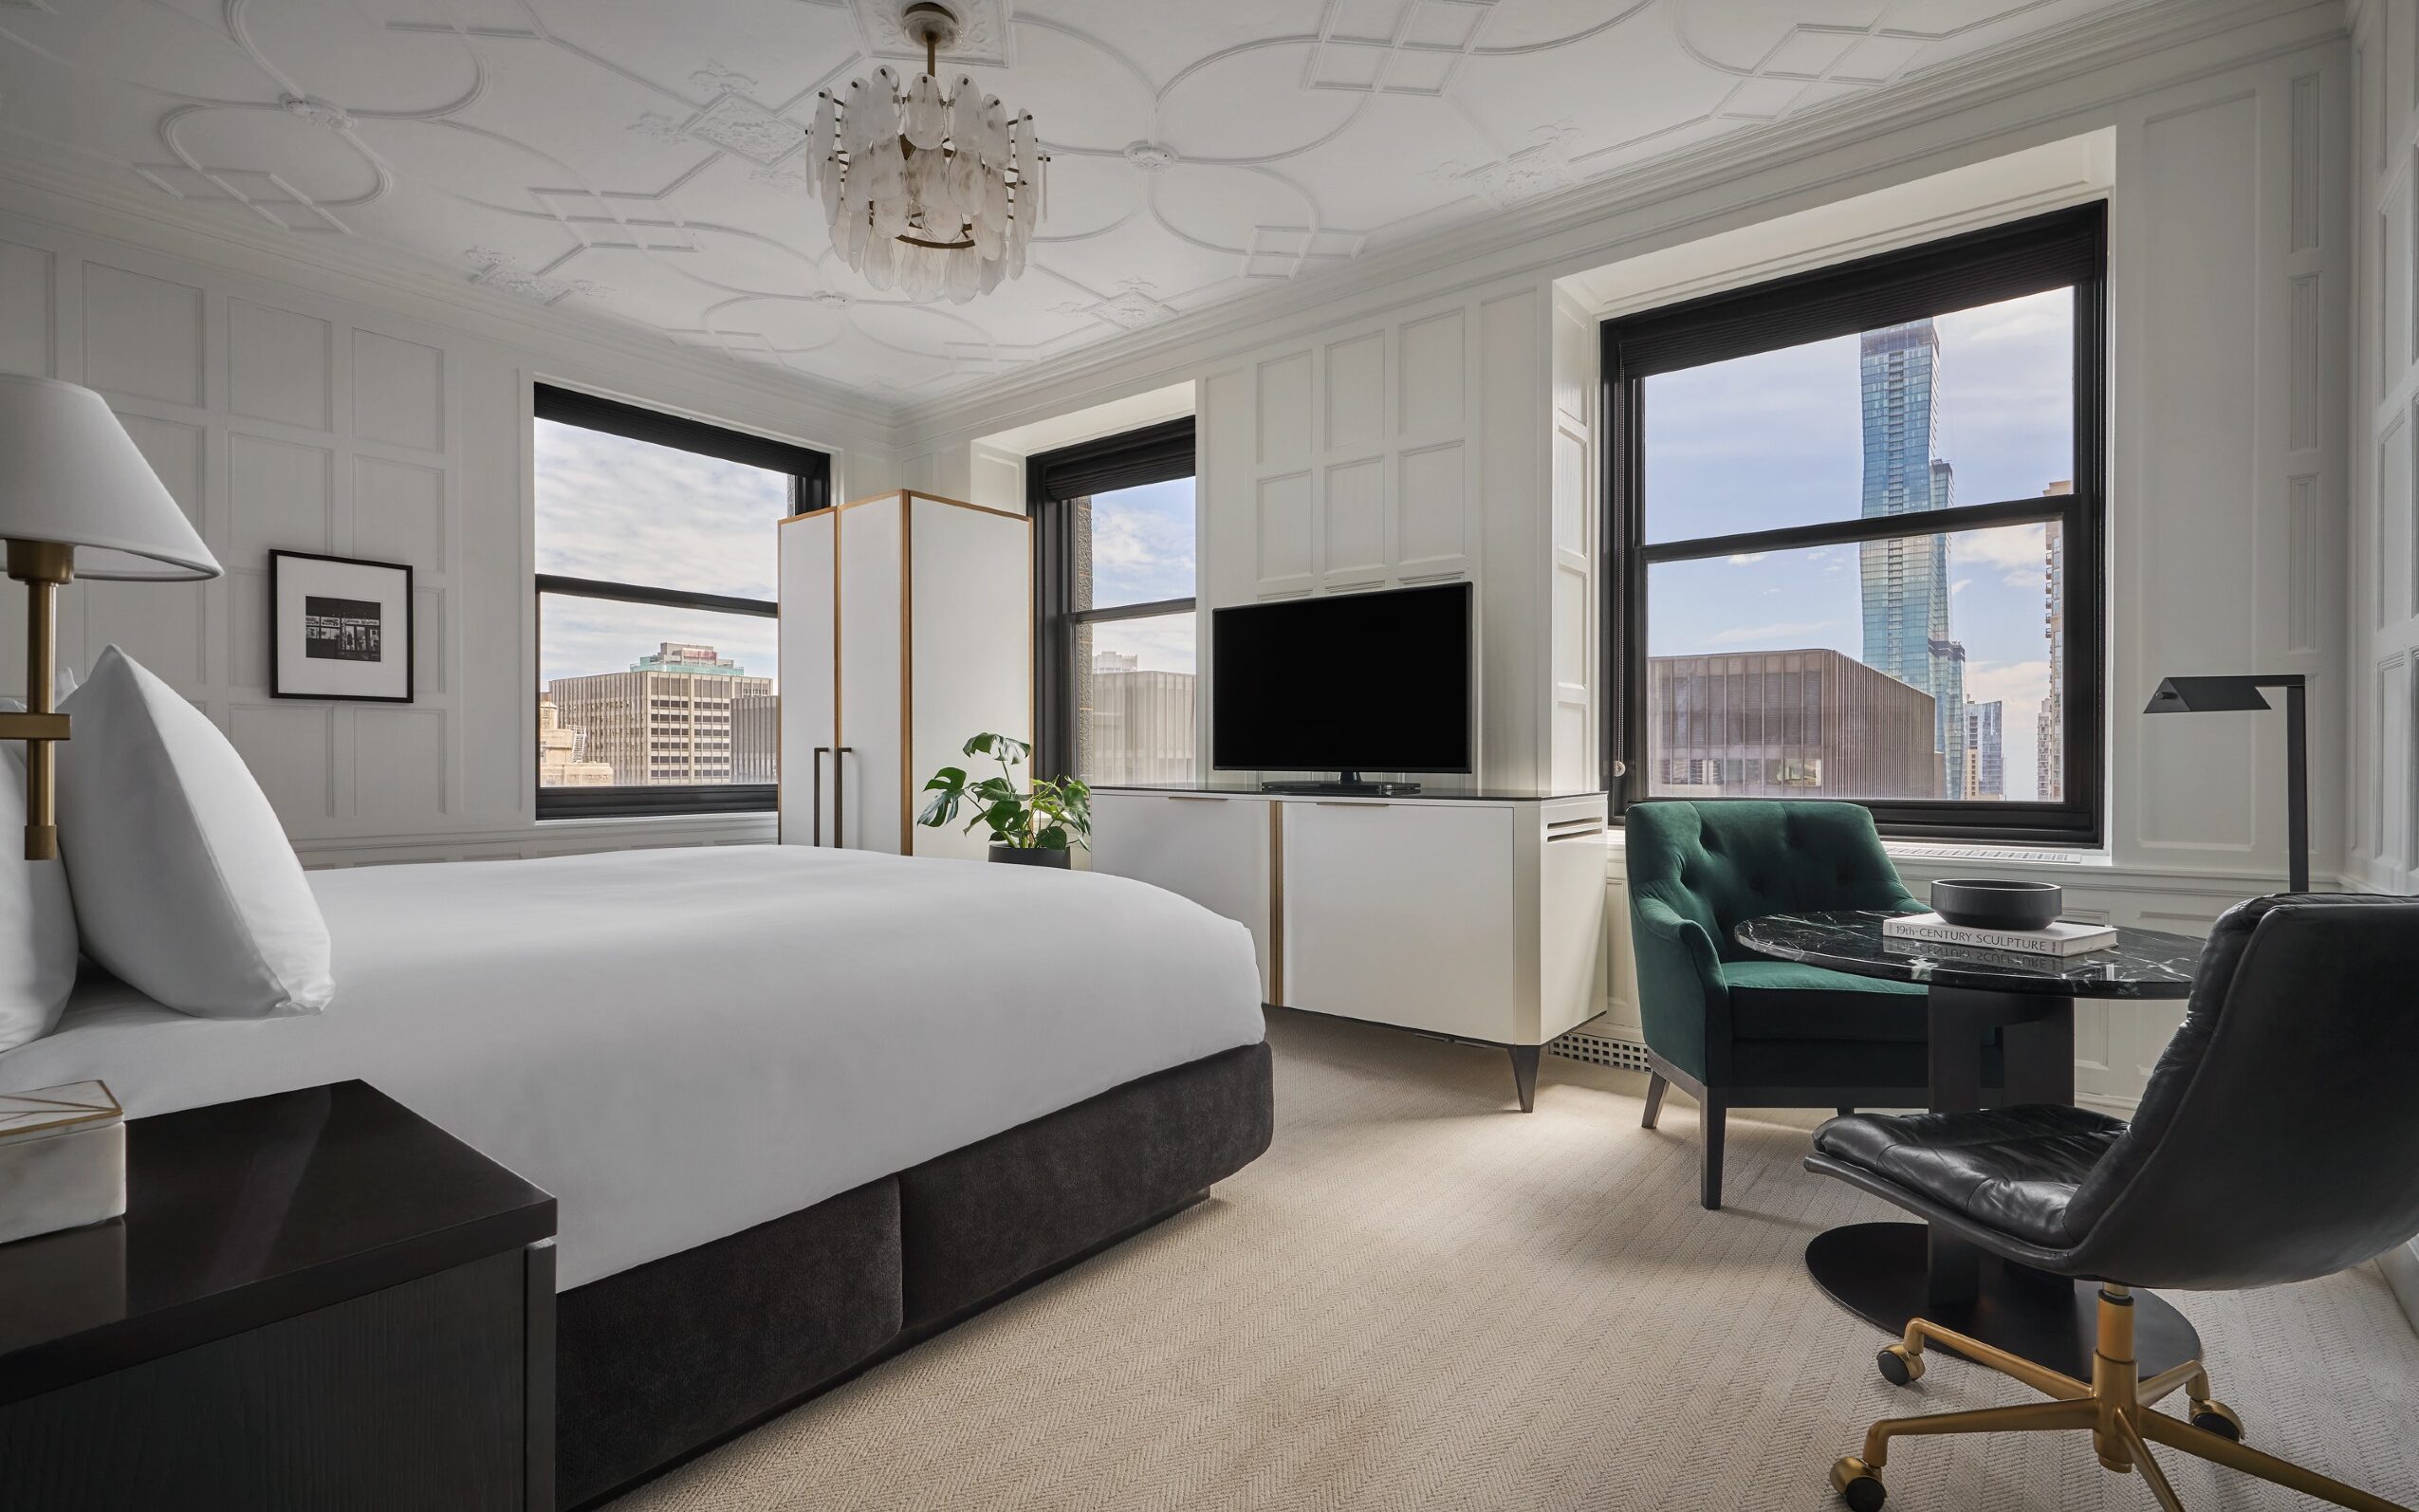 This Modern Luxury Hotel in Downtown Chicago Melds Past and Present With Its Design